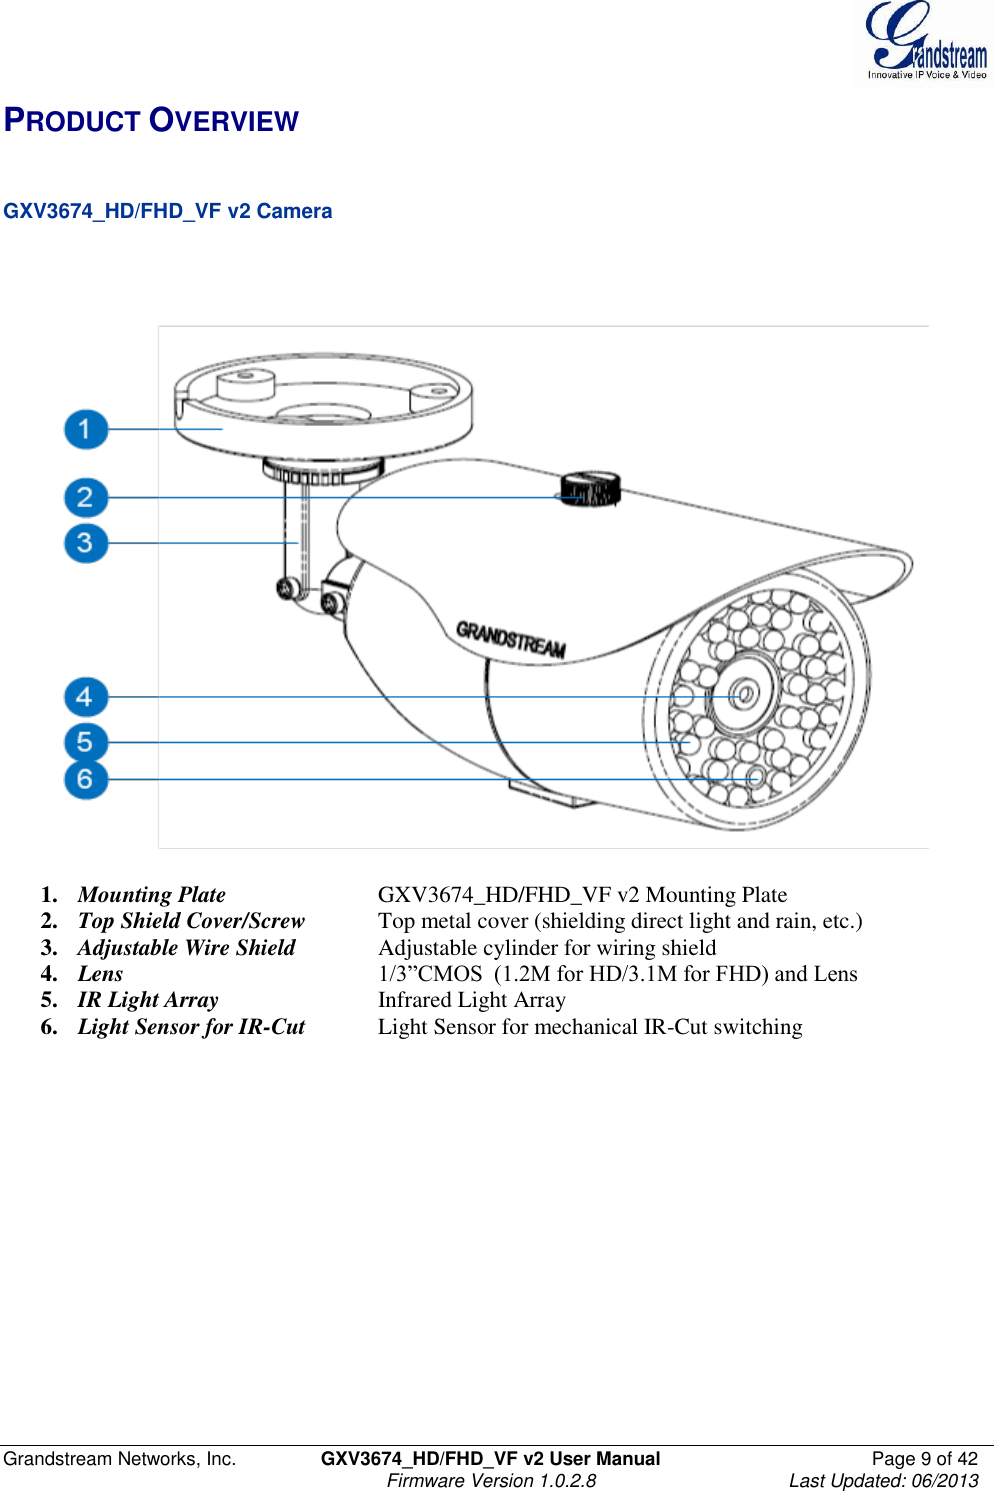  Grandstream Networks, Inc.  GXV3674_HD/FHD_VF v2 User Manual  Page 9 of 42   Firmware Version 1.0.2.8  Last Updated: 06/2013  PRODUCT OVERVIEW   GXV3674_HD/FHD_VF v2 Camera       1. Mounting Plate     GXV3674_HD/FHD_VF v2 Mounting Plate 2. Top Shield Cover/Screw  Top metal cover (shielding direct light and rain, etc.) 3. Adjustable Wire Shield   Adjustable cylinder for wiring shield 4. Lens        1/3”CMOS  (1.2M for HD/3.1M for FHD) and Lens 5. IR Light Array     Infrared Light Array 6. Light Sensor for IR-Cut  Light Sensor for mechanical IR-Cut switching  